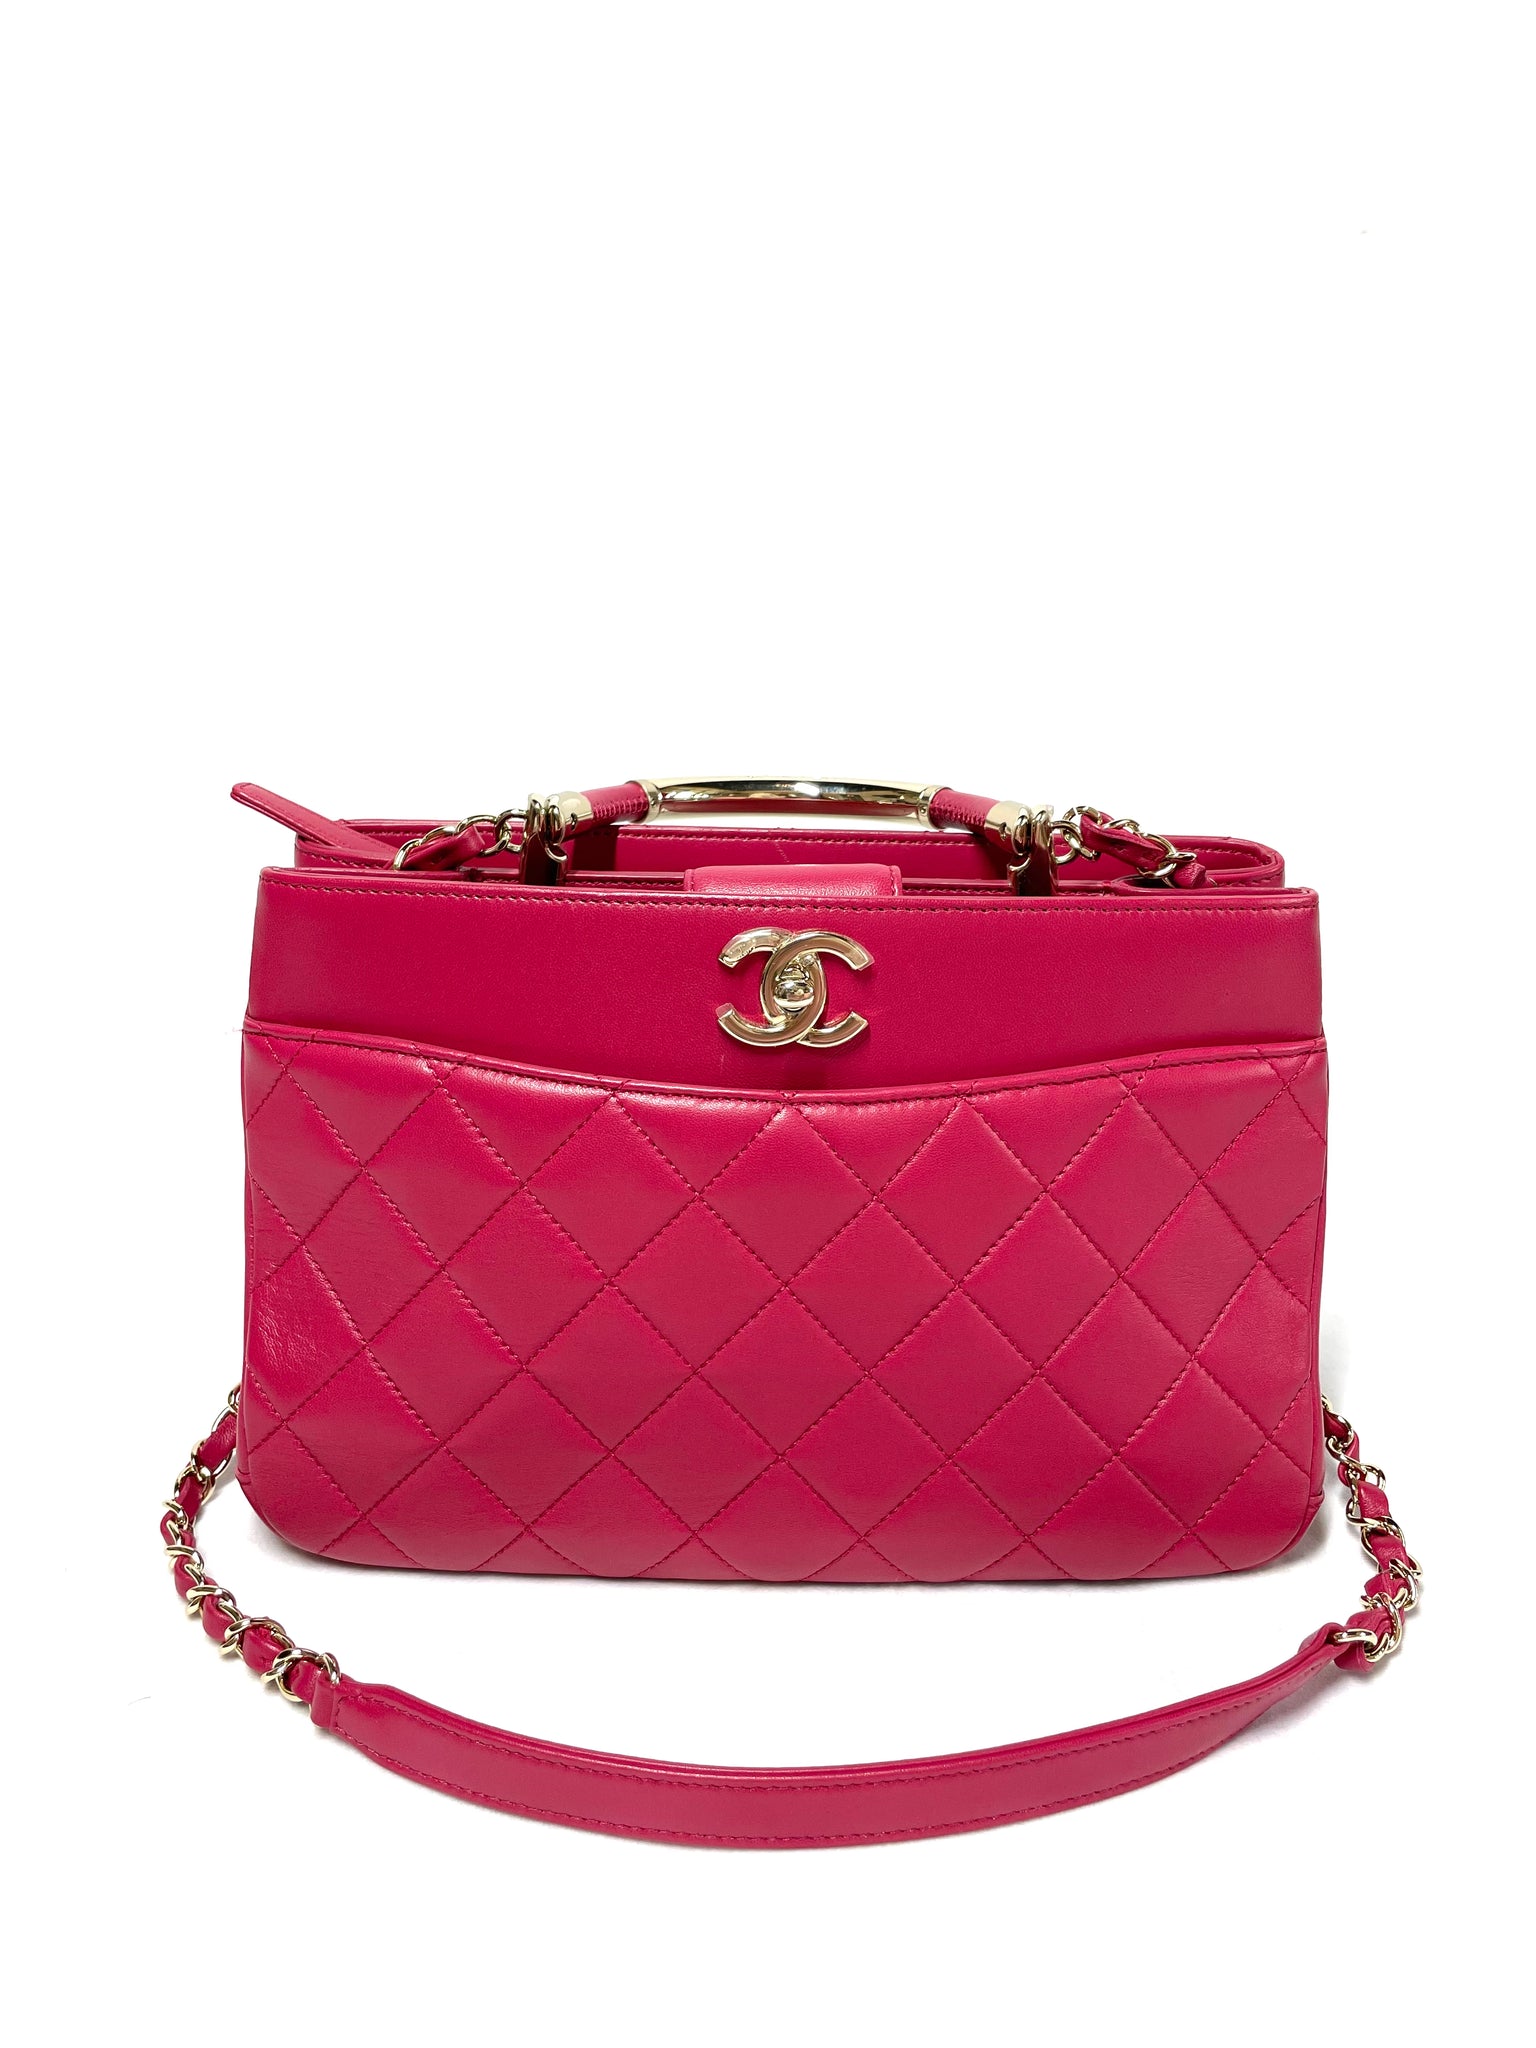 Chanel Vintage Red Quilted Lambskin Mini Flap Shoulder Chain Bag